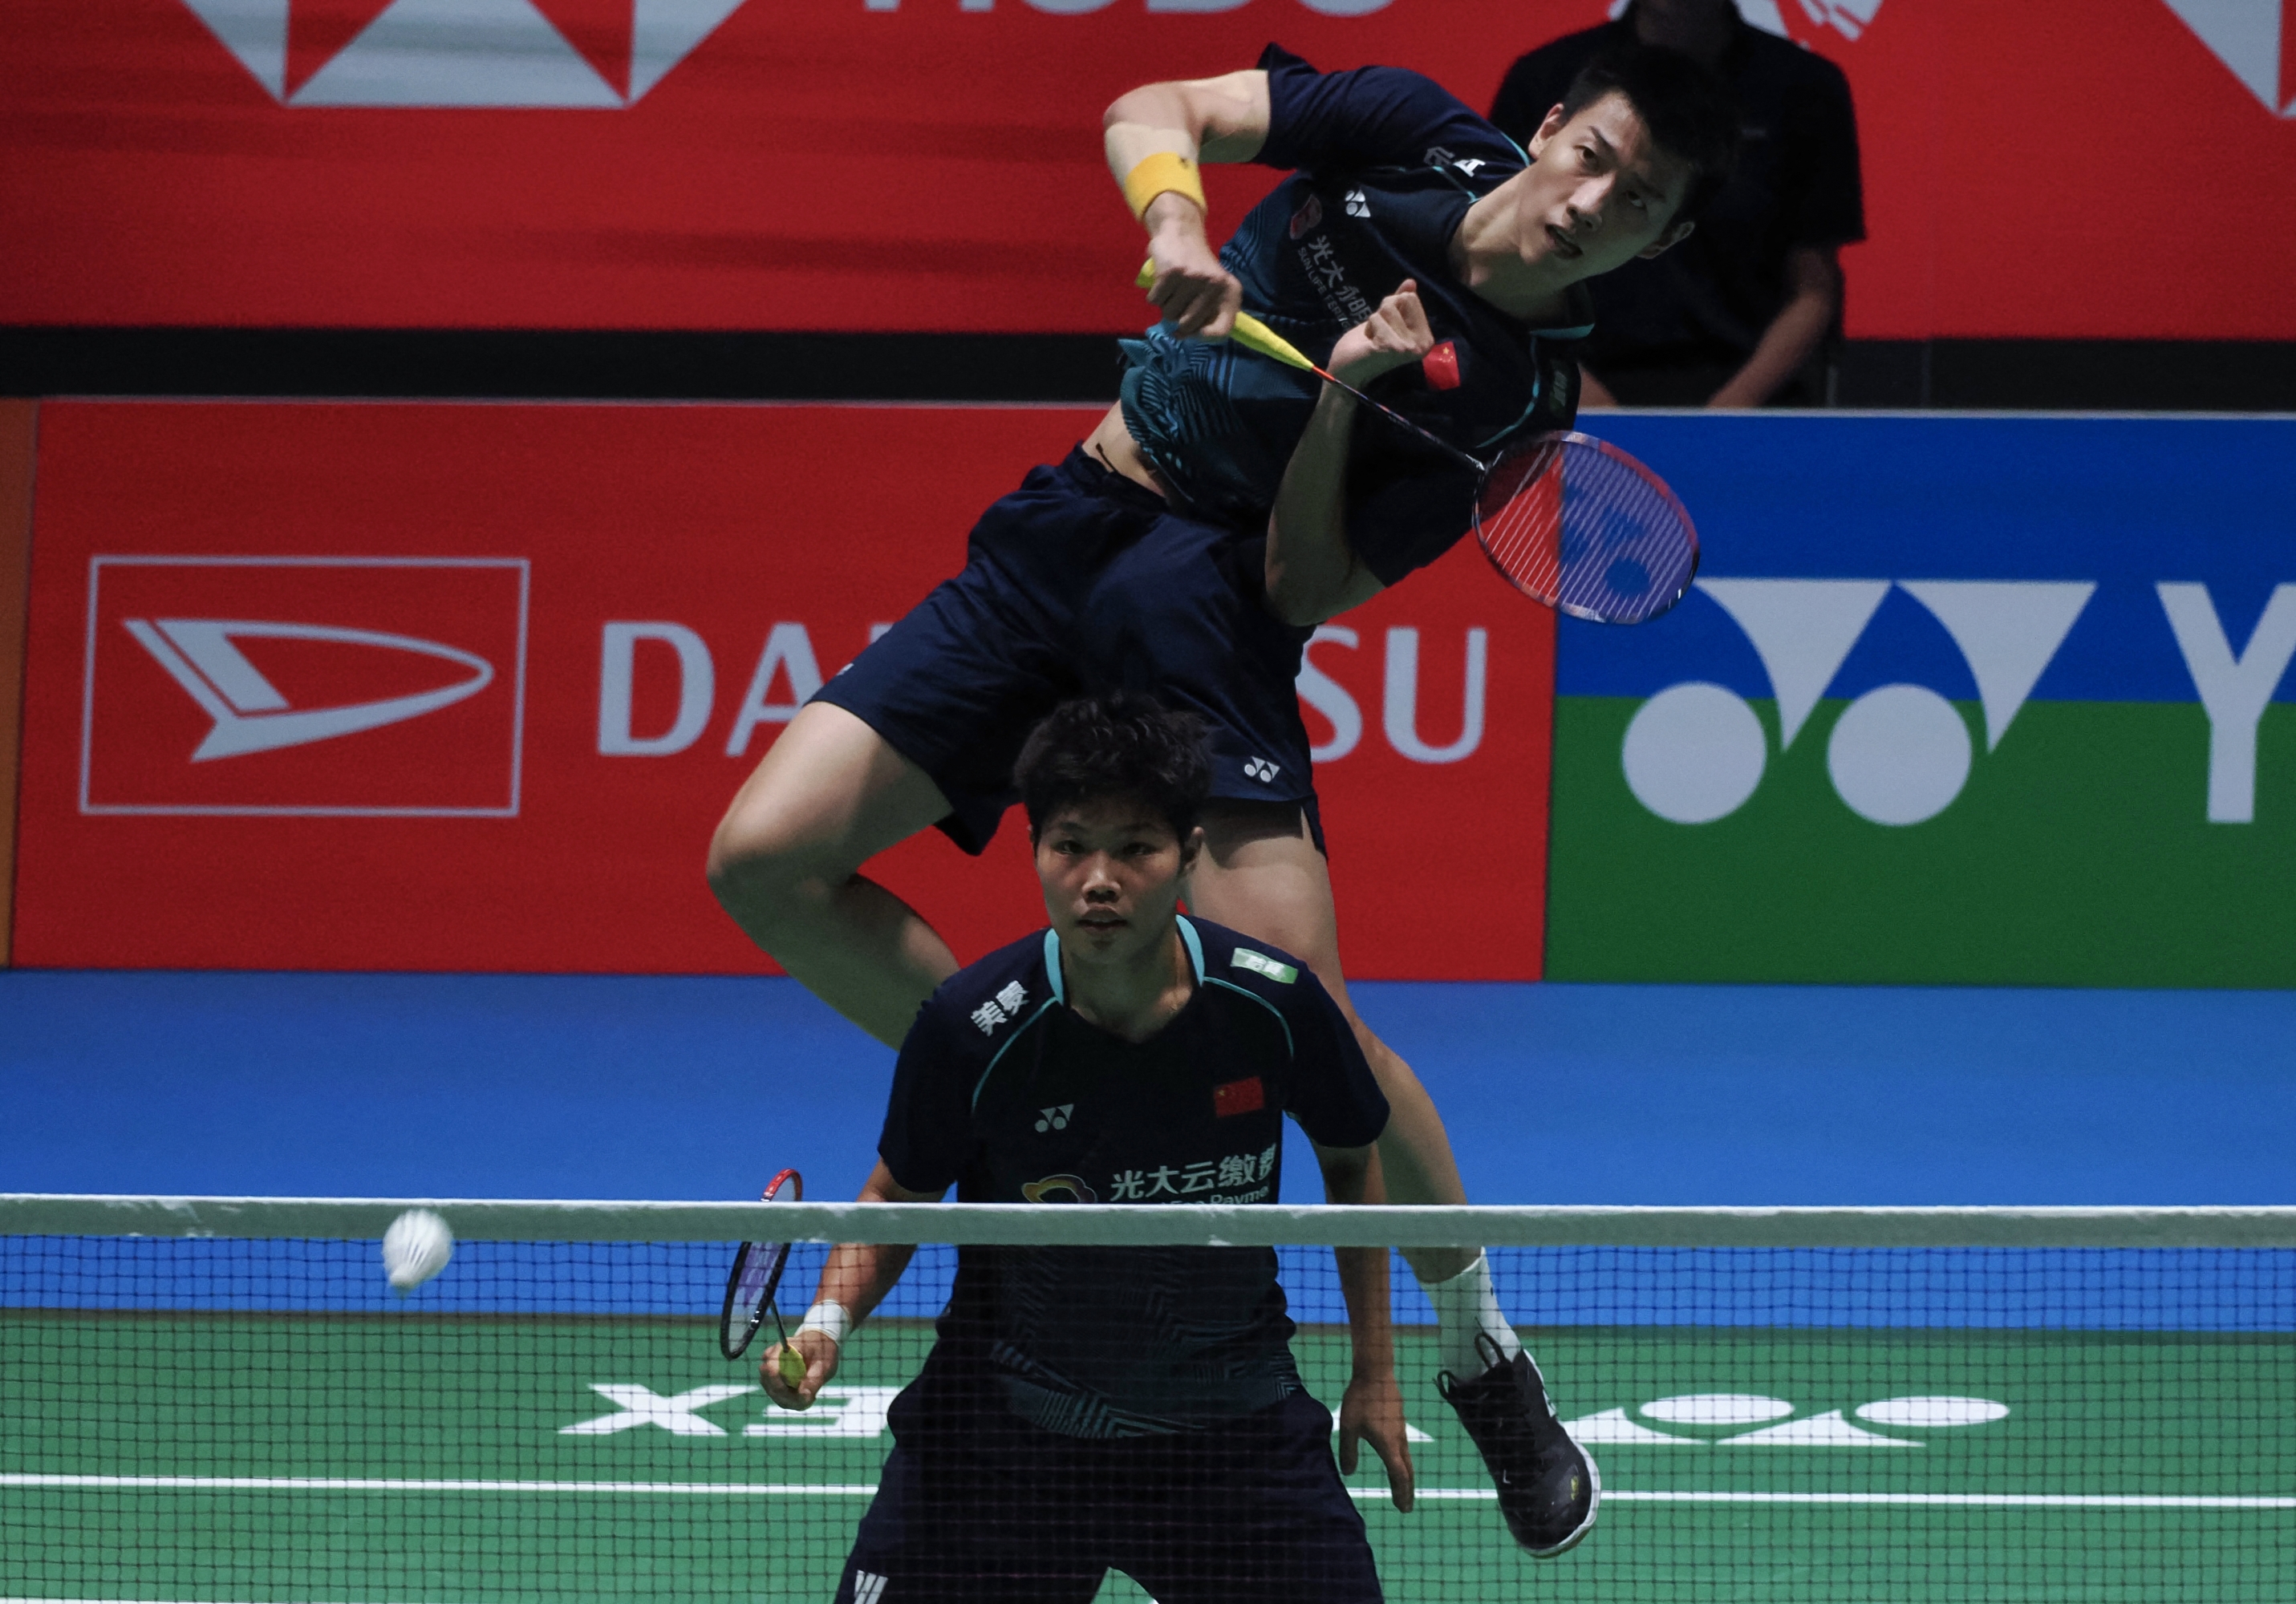 Feng Yan Zhe (rear) and Huang Dong Ping of China hits a return against Dechapol Puavaranukroh and Sapsiree Taerattanachai of Thailand (not pictured) during their mixed double semi final match on the fifth day of the Japan Open badminton tournament in Tokyo on July 29, 2023. (Photo by Toshifumi KITAMURA / AFP)